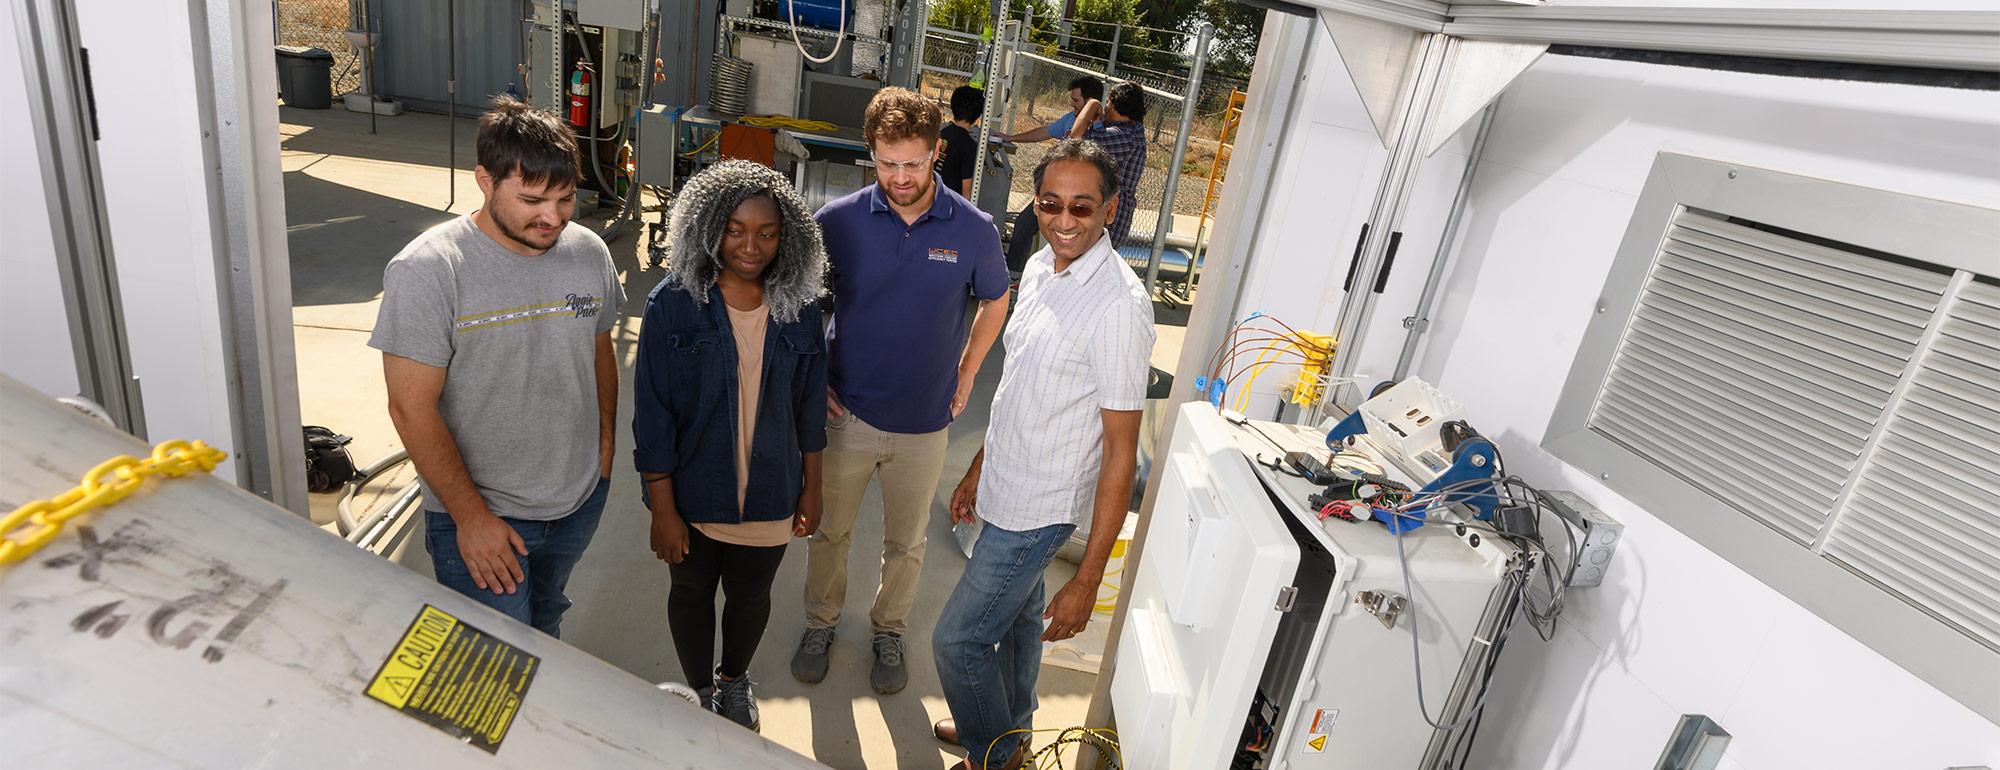 3 students working with Professor Vinod Narayanan at the Western Cooling Efficiency Center about a project.